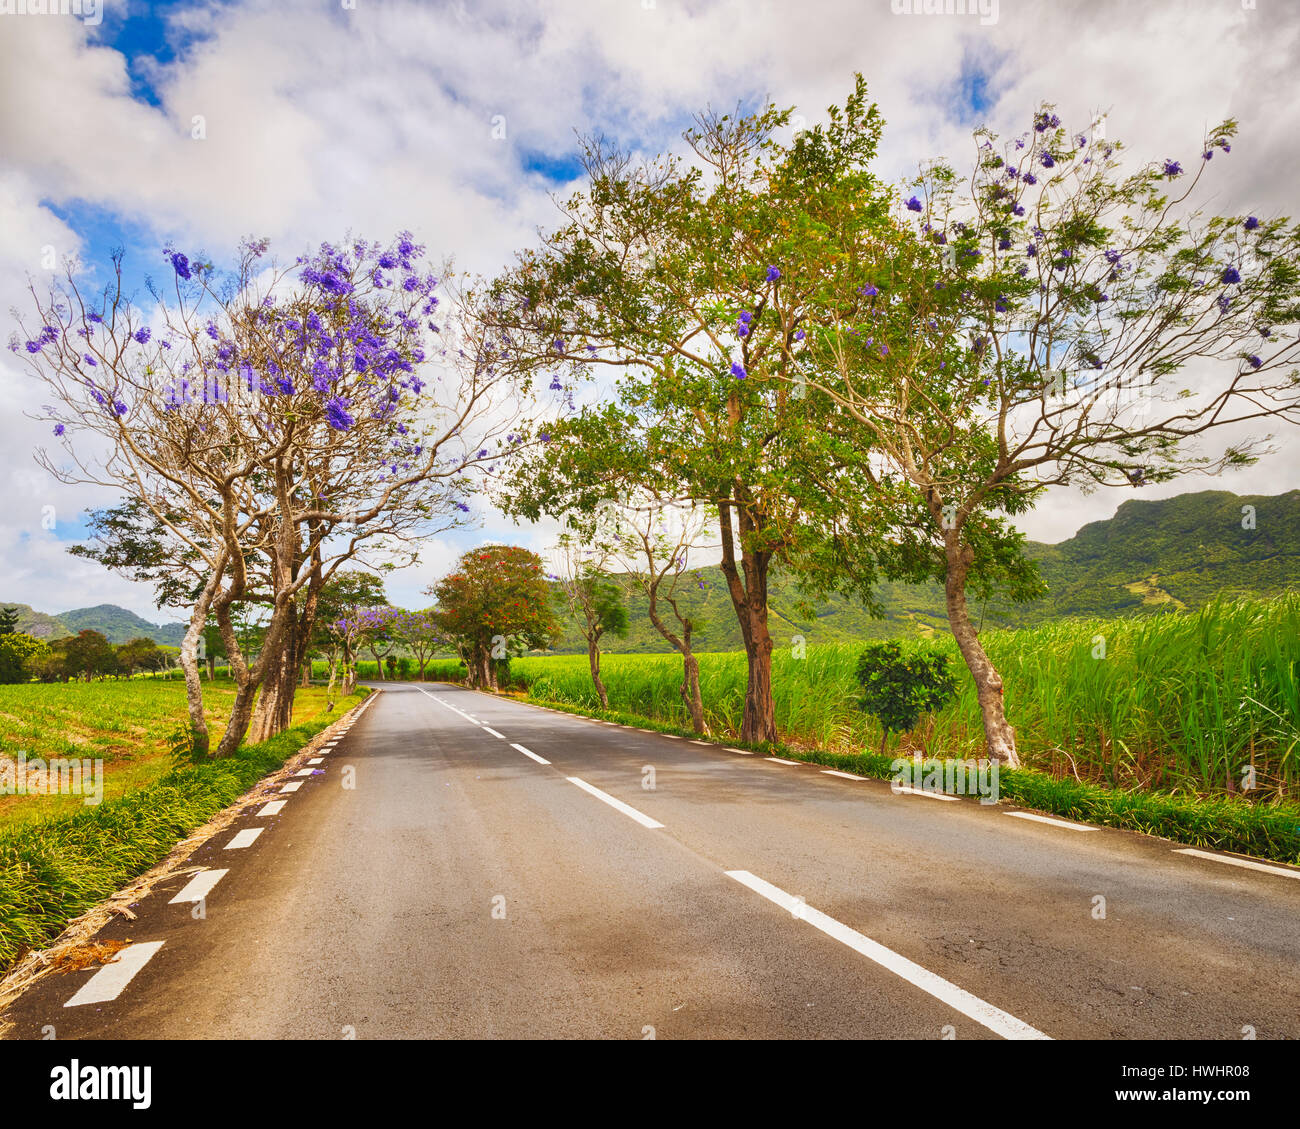 Trees in bloom and sugar cane plantations on a quite road among green hills landscape, Mauritius Stock Photo